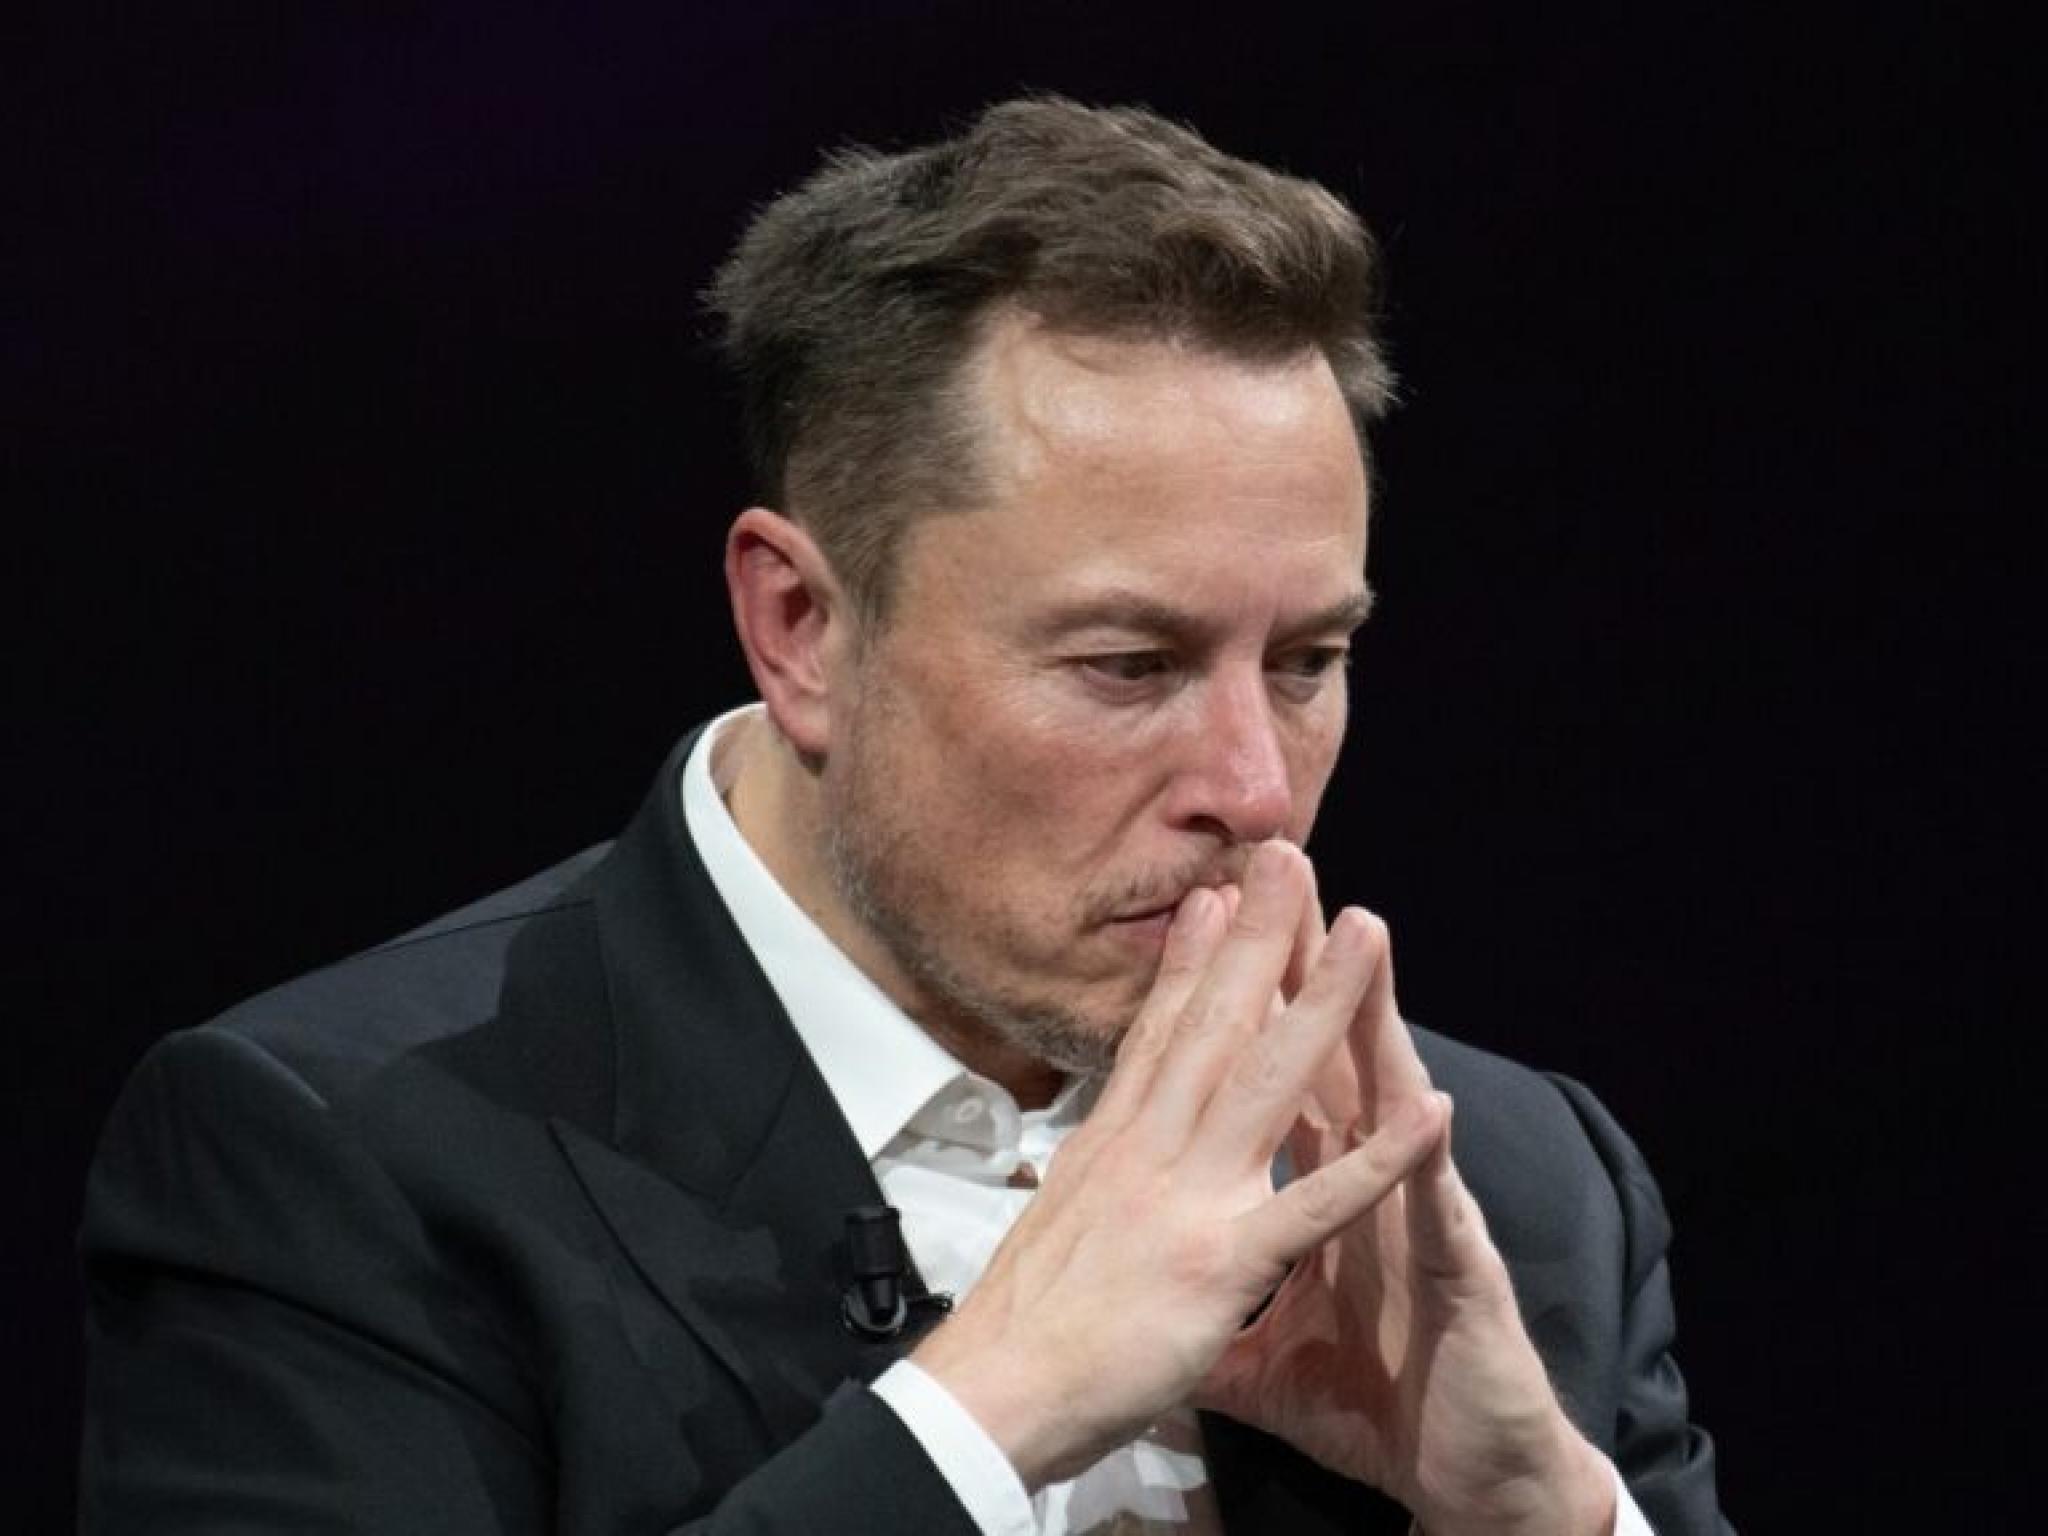  watershed-moment-says-tesla-analyst-as-elon-musk-makes-surprise-china-visit-to-reportedly-discuss-fsd-rollout-and-data-transfer-overseas 